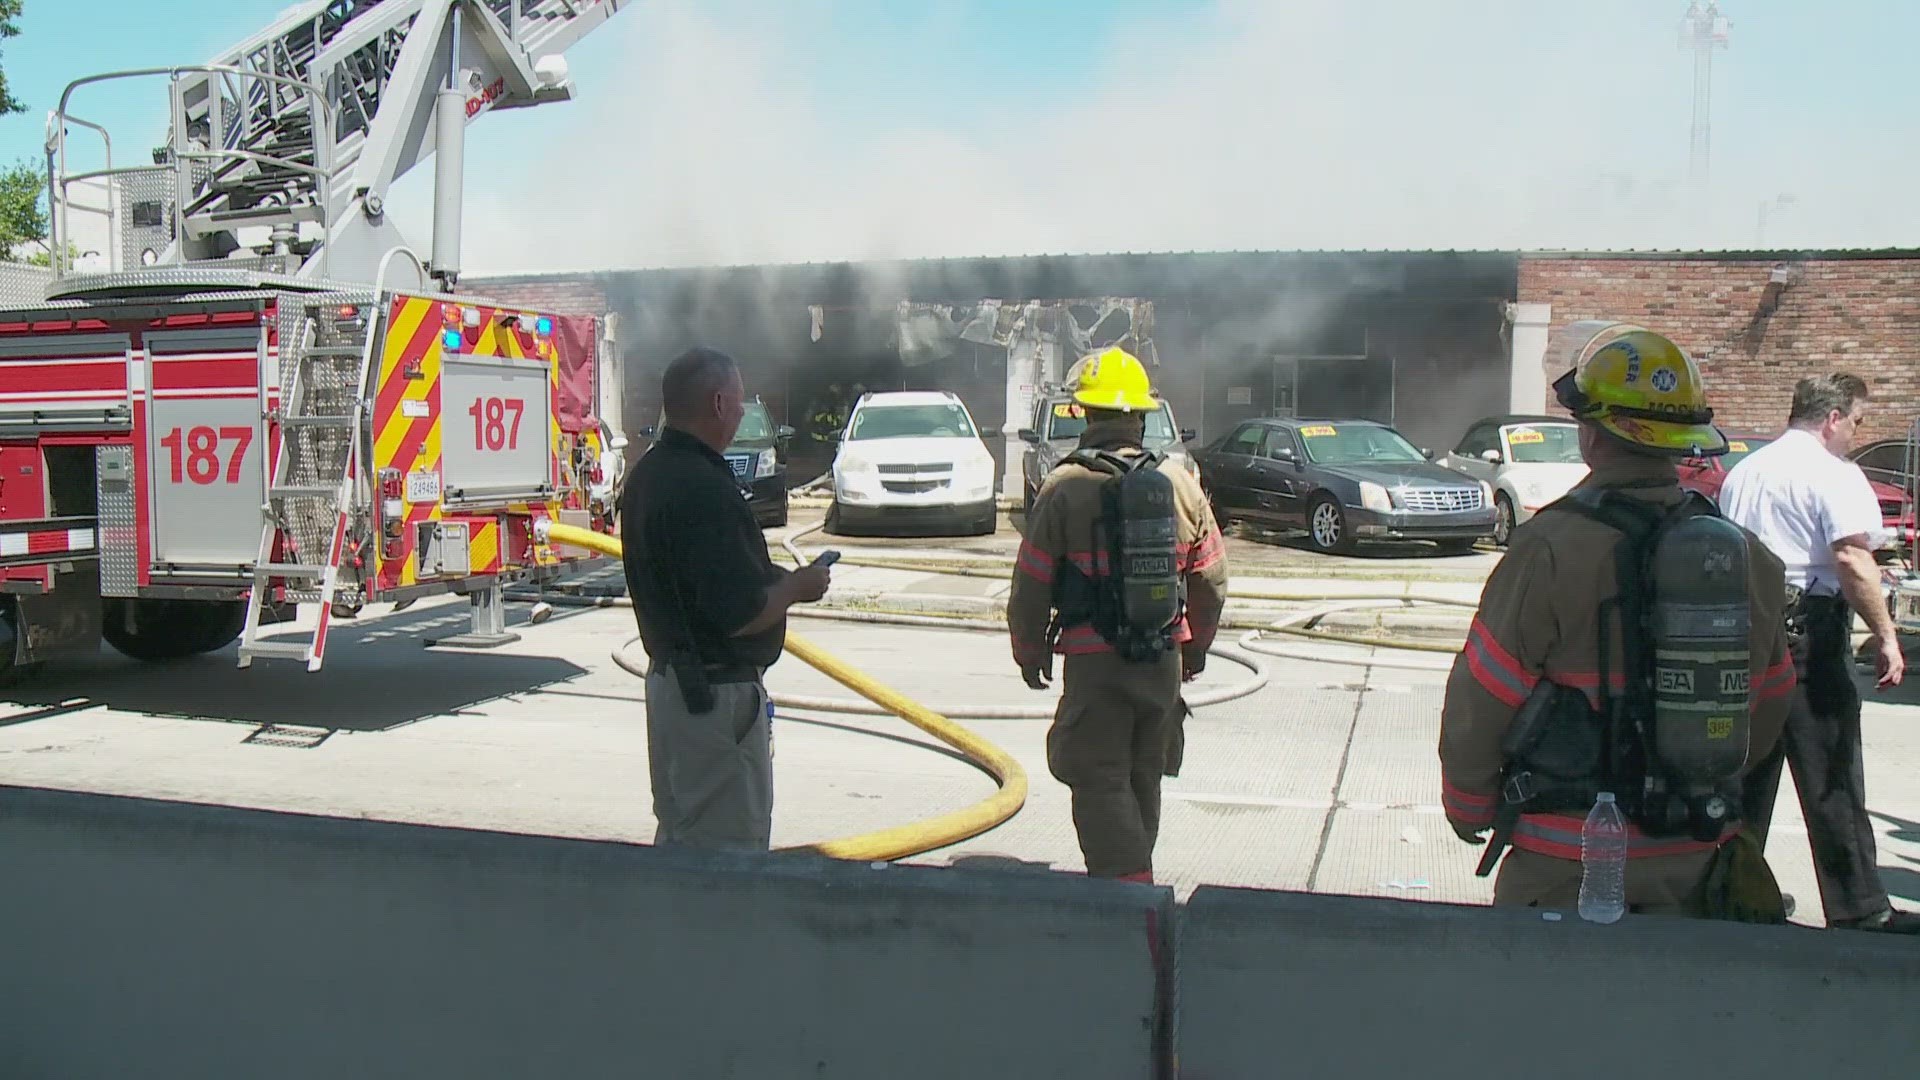 The Jefferson Parish Fire Department battled a 3-alarm blaze at a used car lot along North Causeway at Veterans Boulevard on Thursday afternoon.